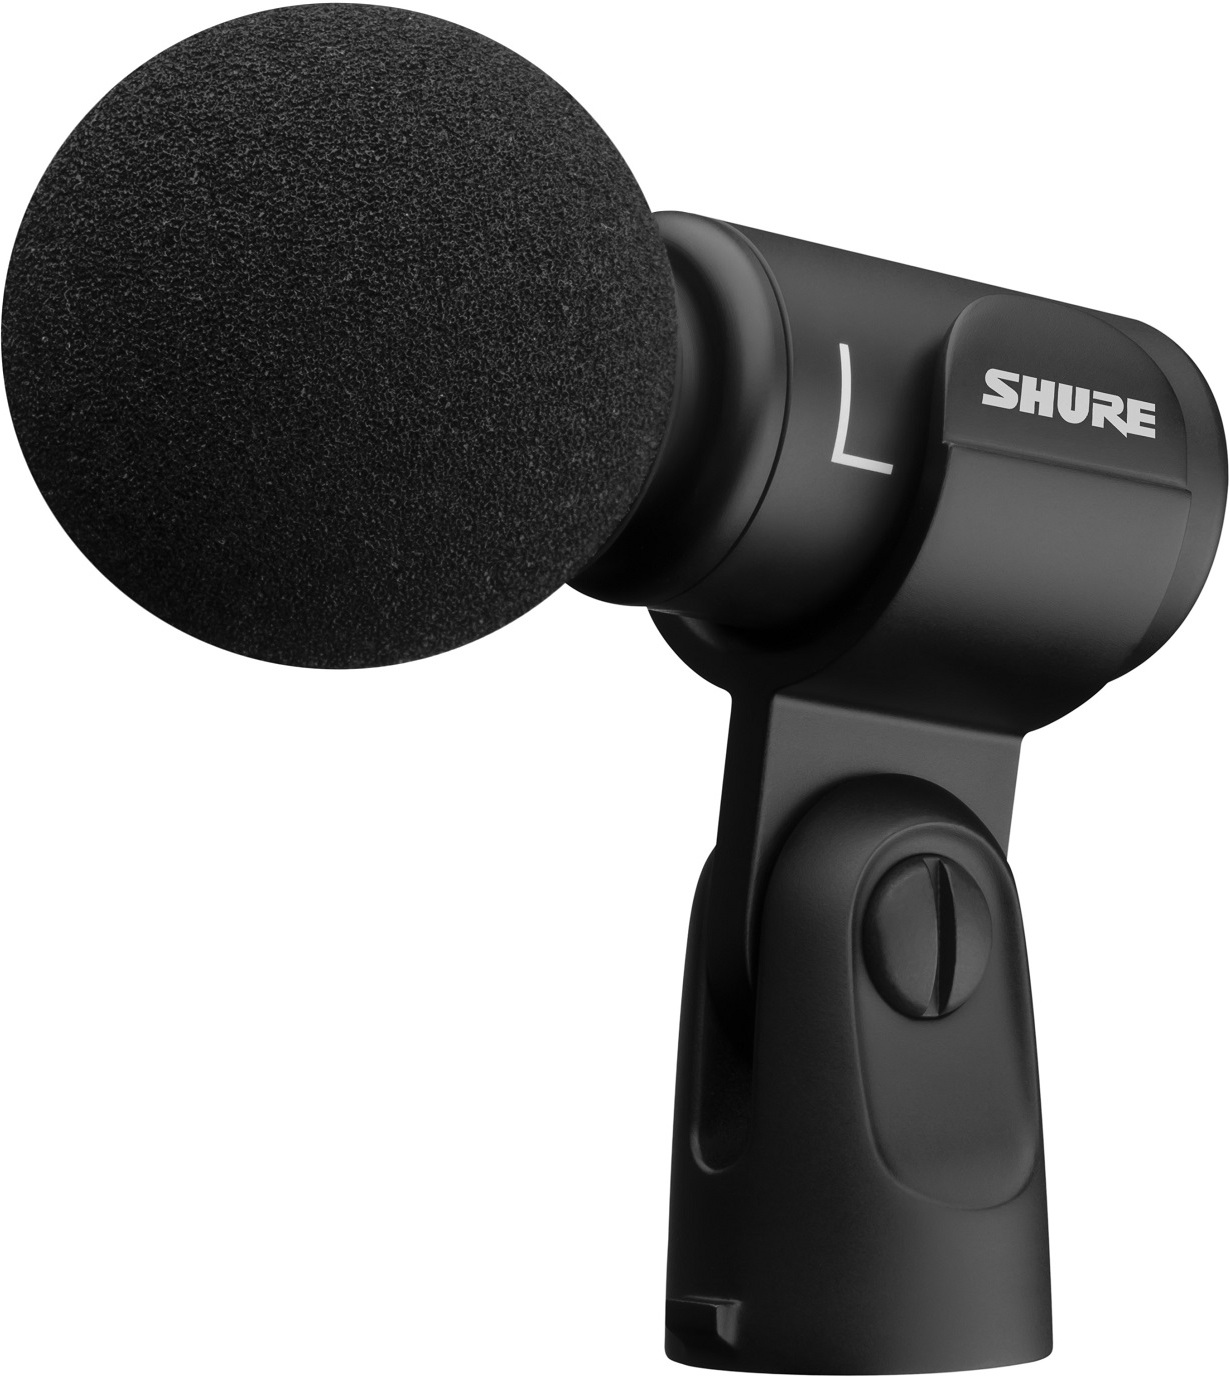 Shure Mv88 + Stereo Usb - Microphone usb - Main picture